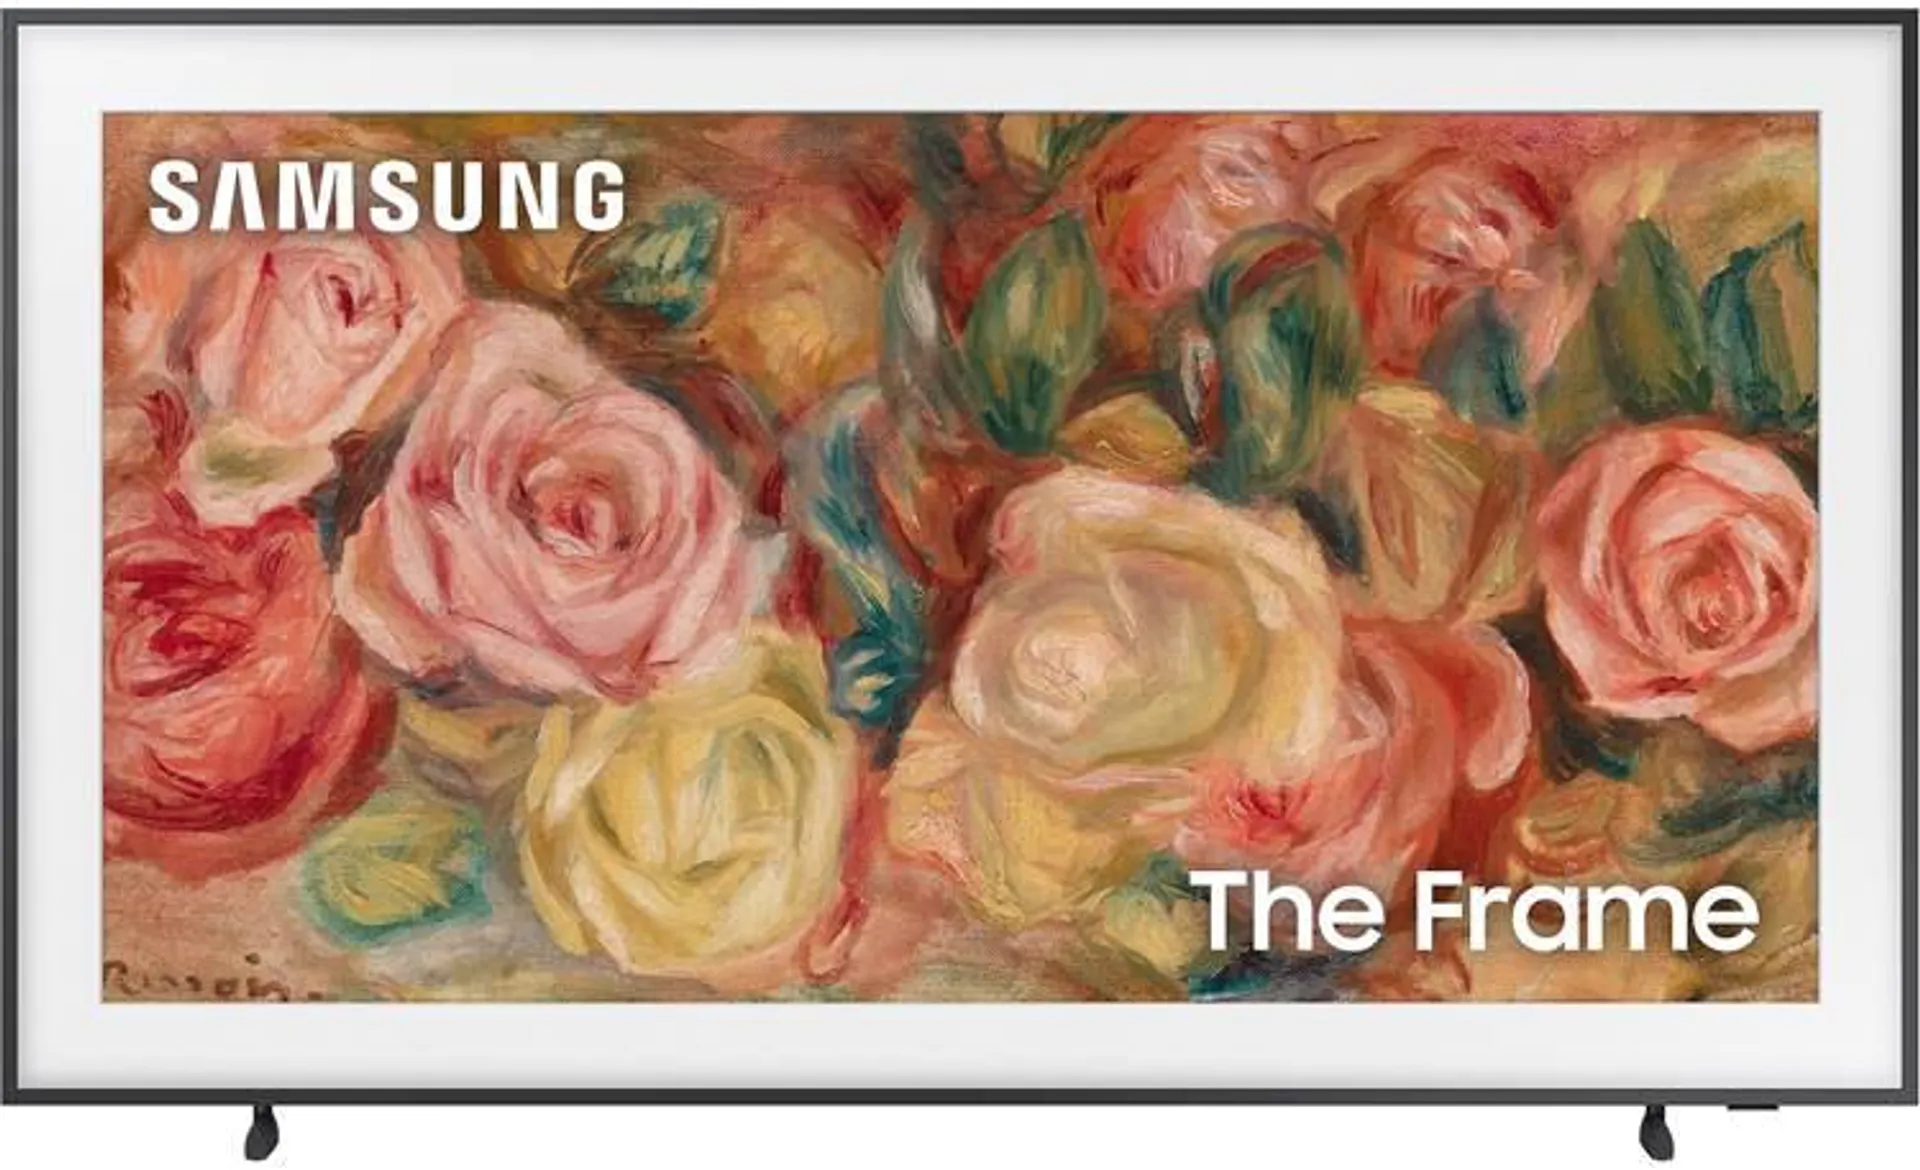 Samsung "The Frame" LS03D Smart QLED UHD TV with HDR and art display modes (50")